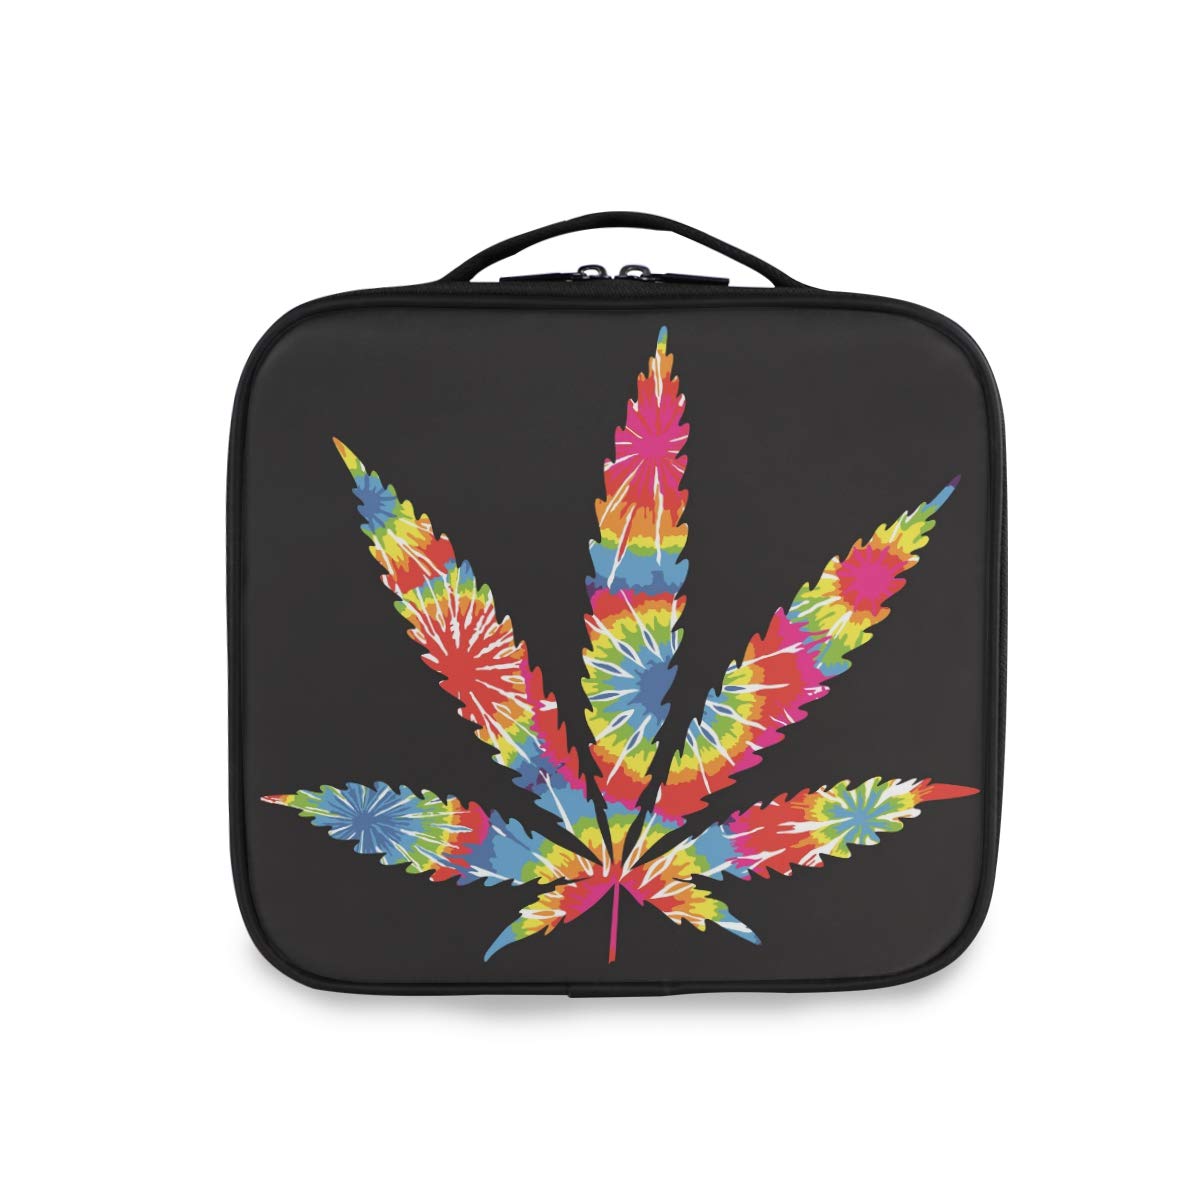 ALAZA Travel Makeup Case Tie Dyed Pot Leaf Cosmetic toiletry Travel bag for Women Girls